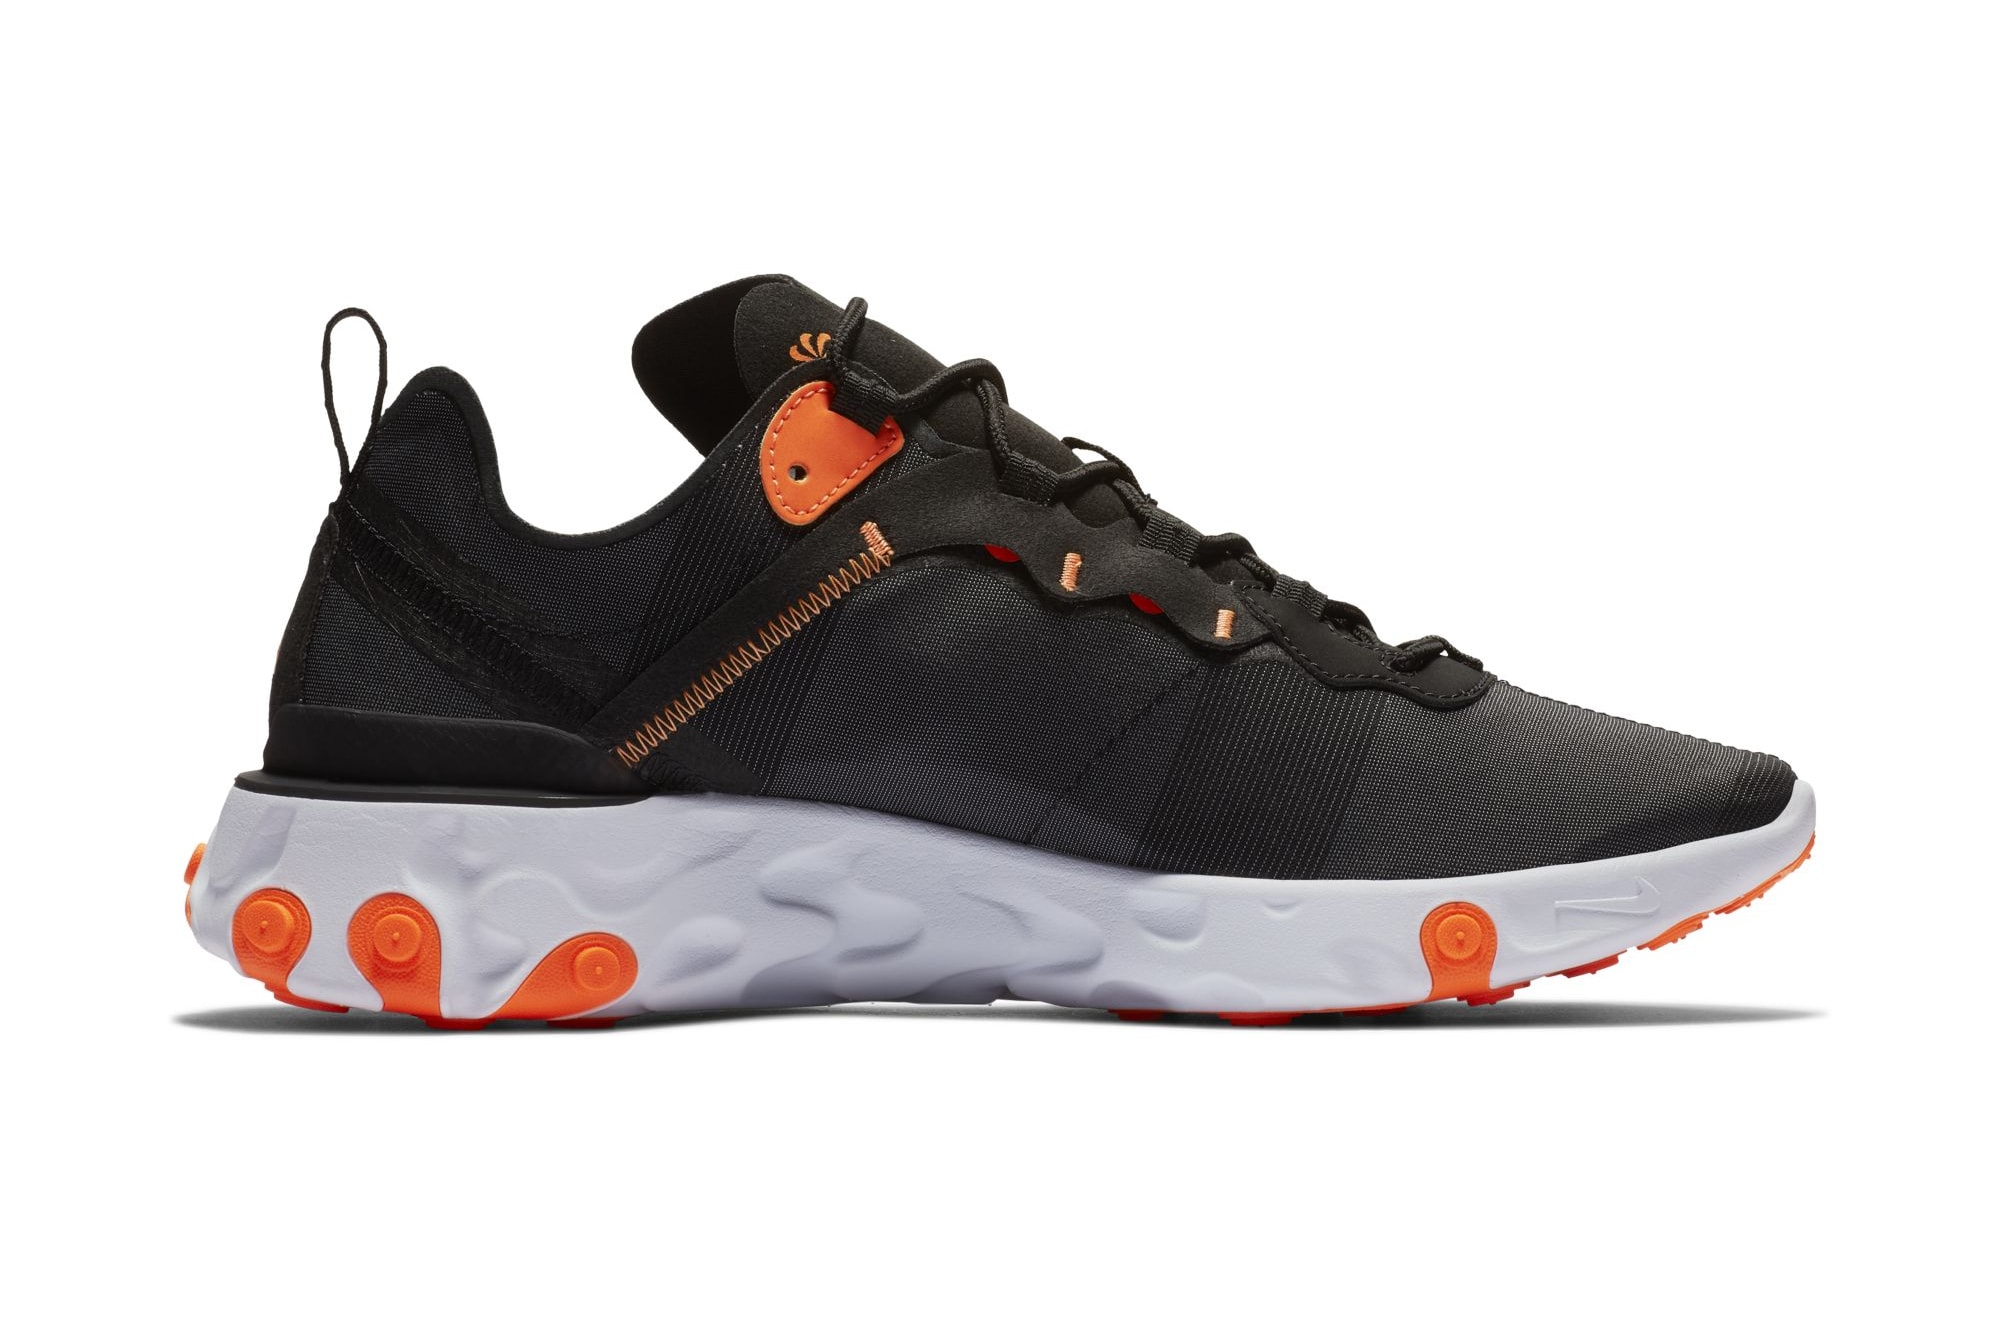 Nike React Element 55 "Black/Total Orange" sneaker colorway release date info price purchase buy trainers